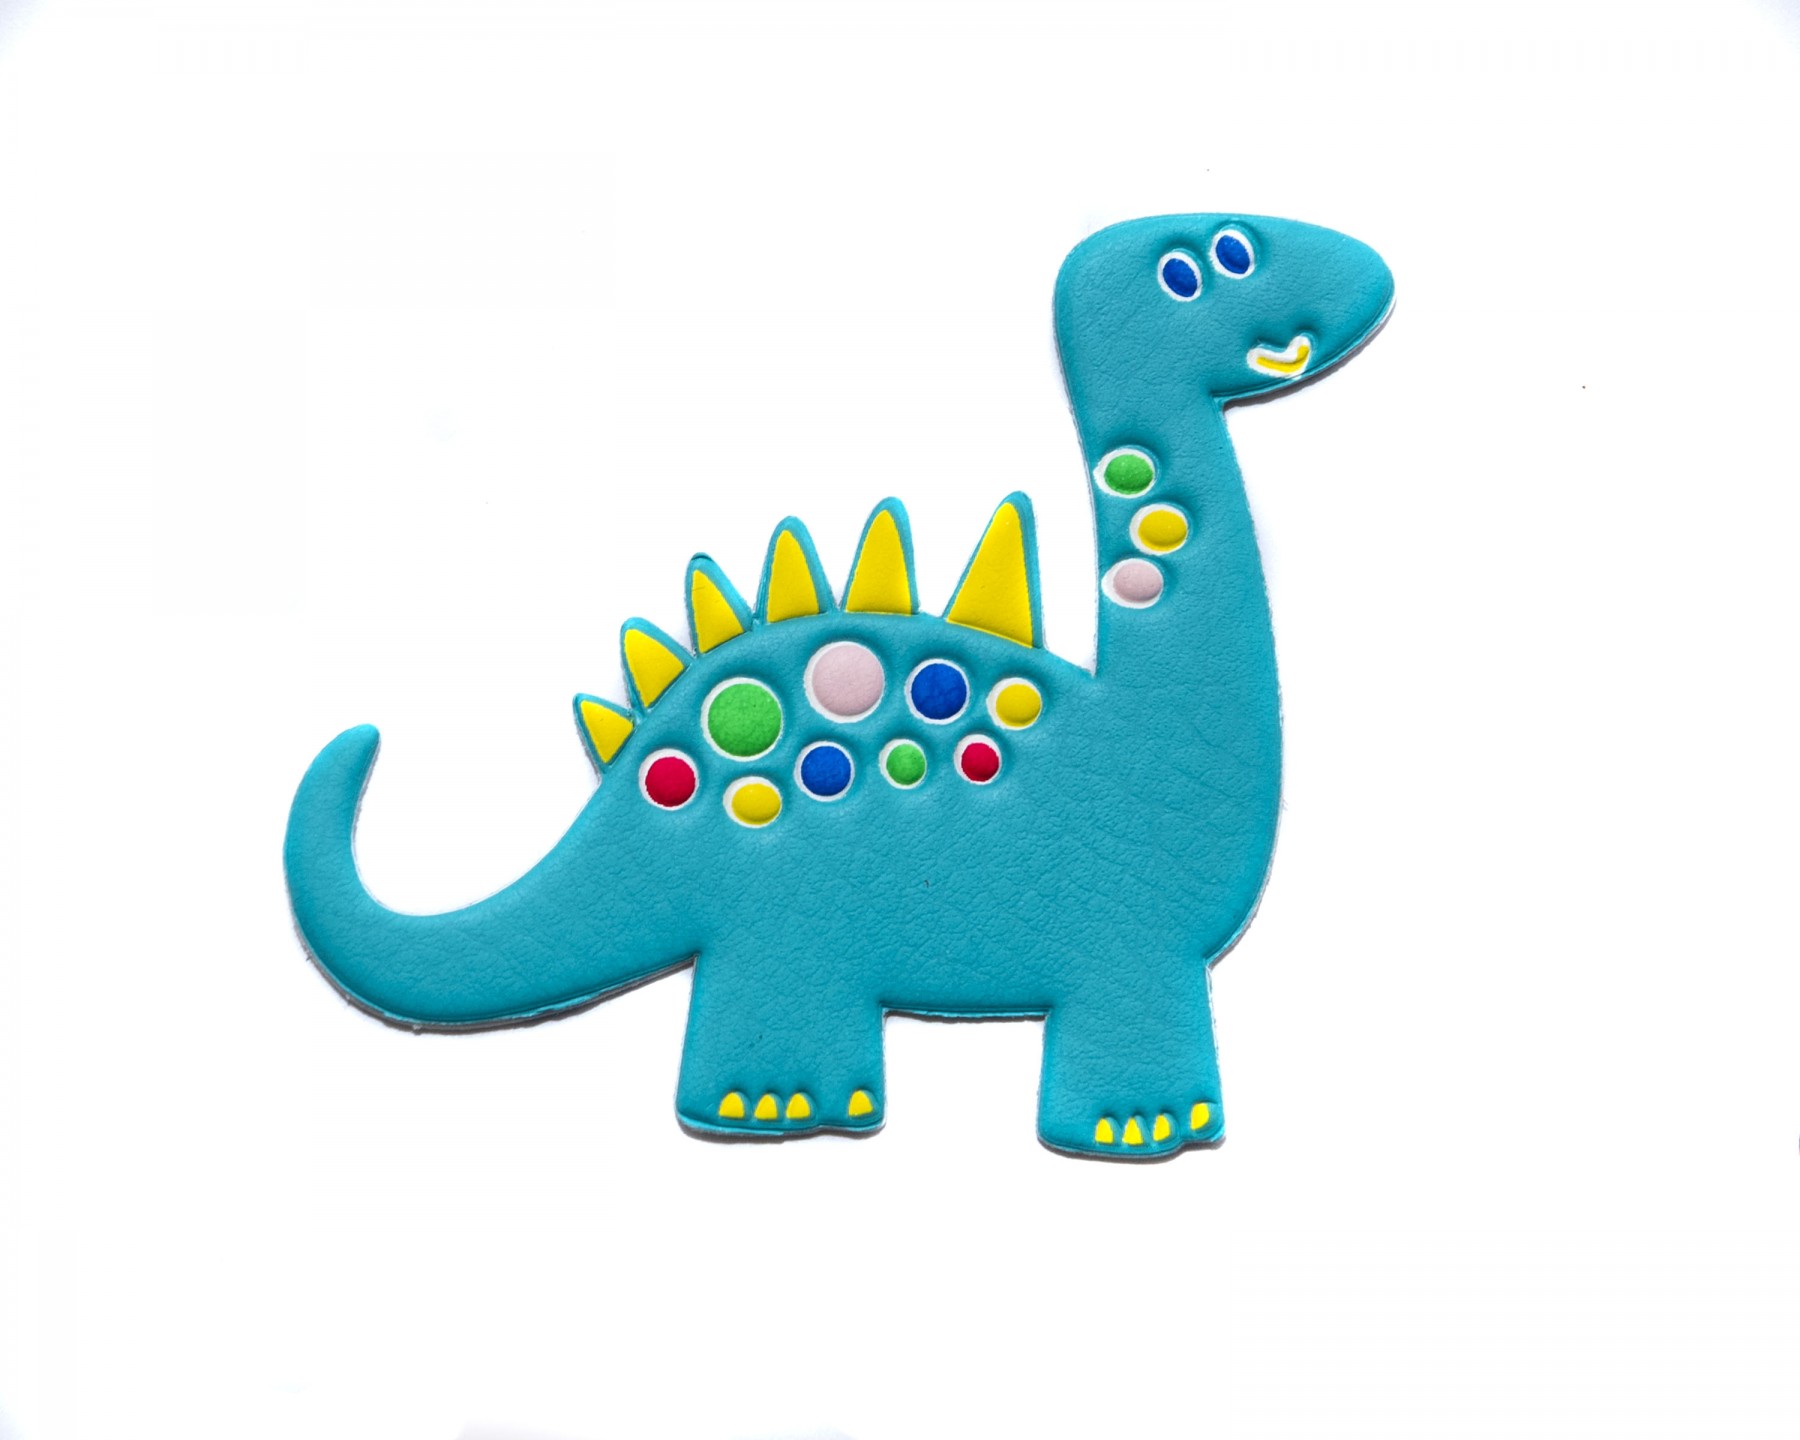  Dinosaur  sticker  fab finds leather look stickers  